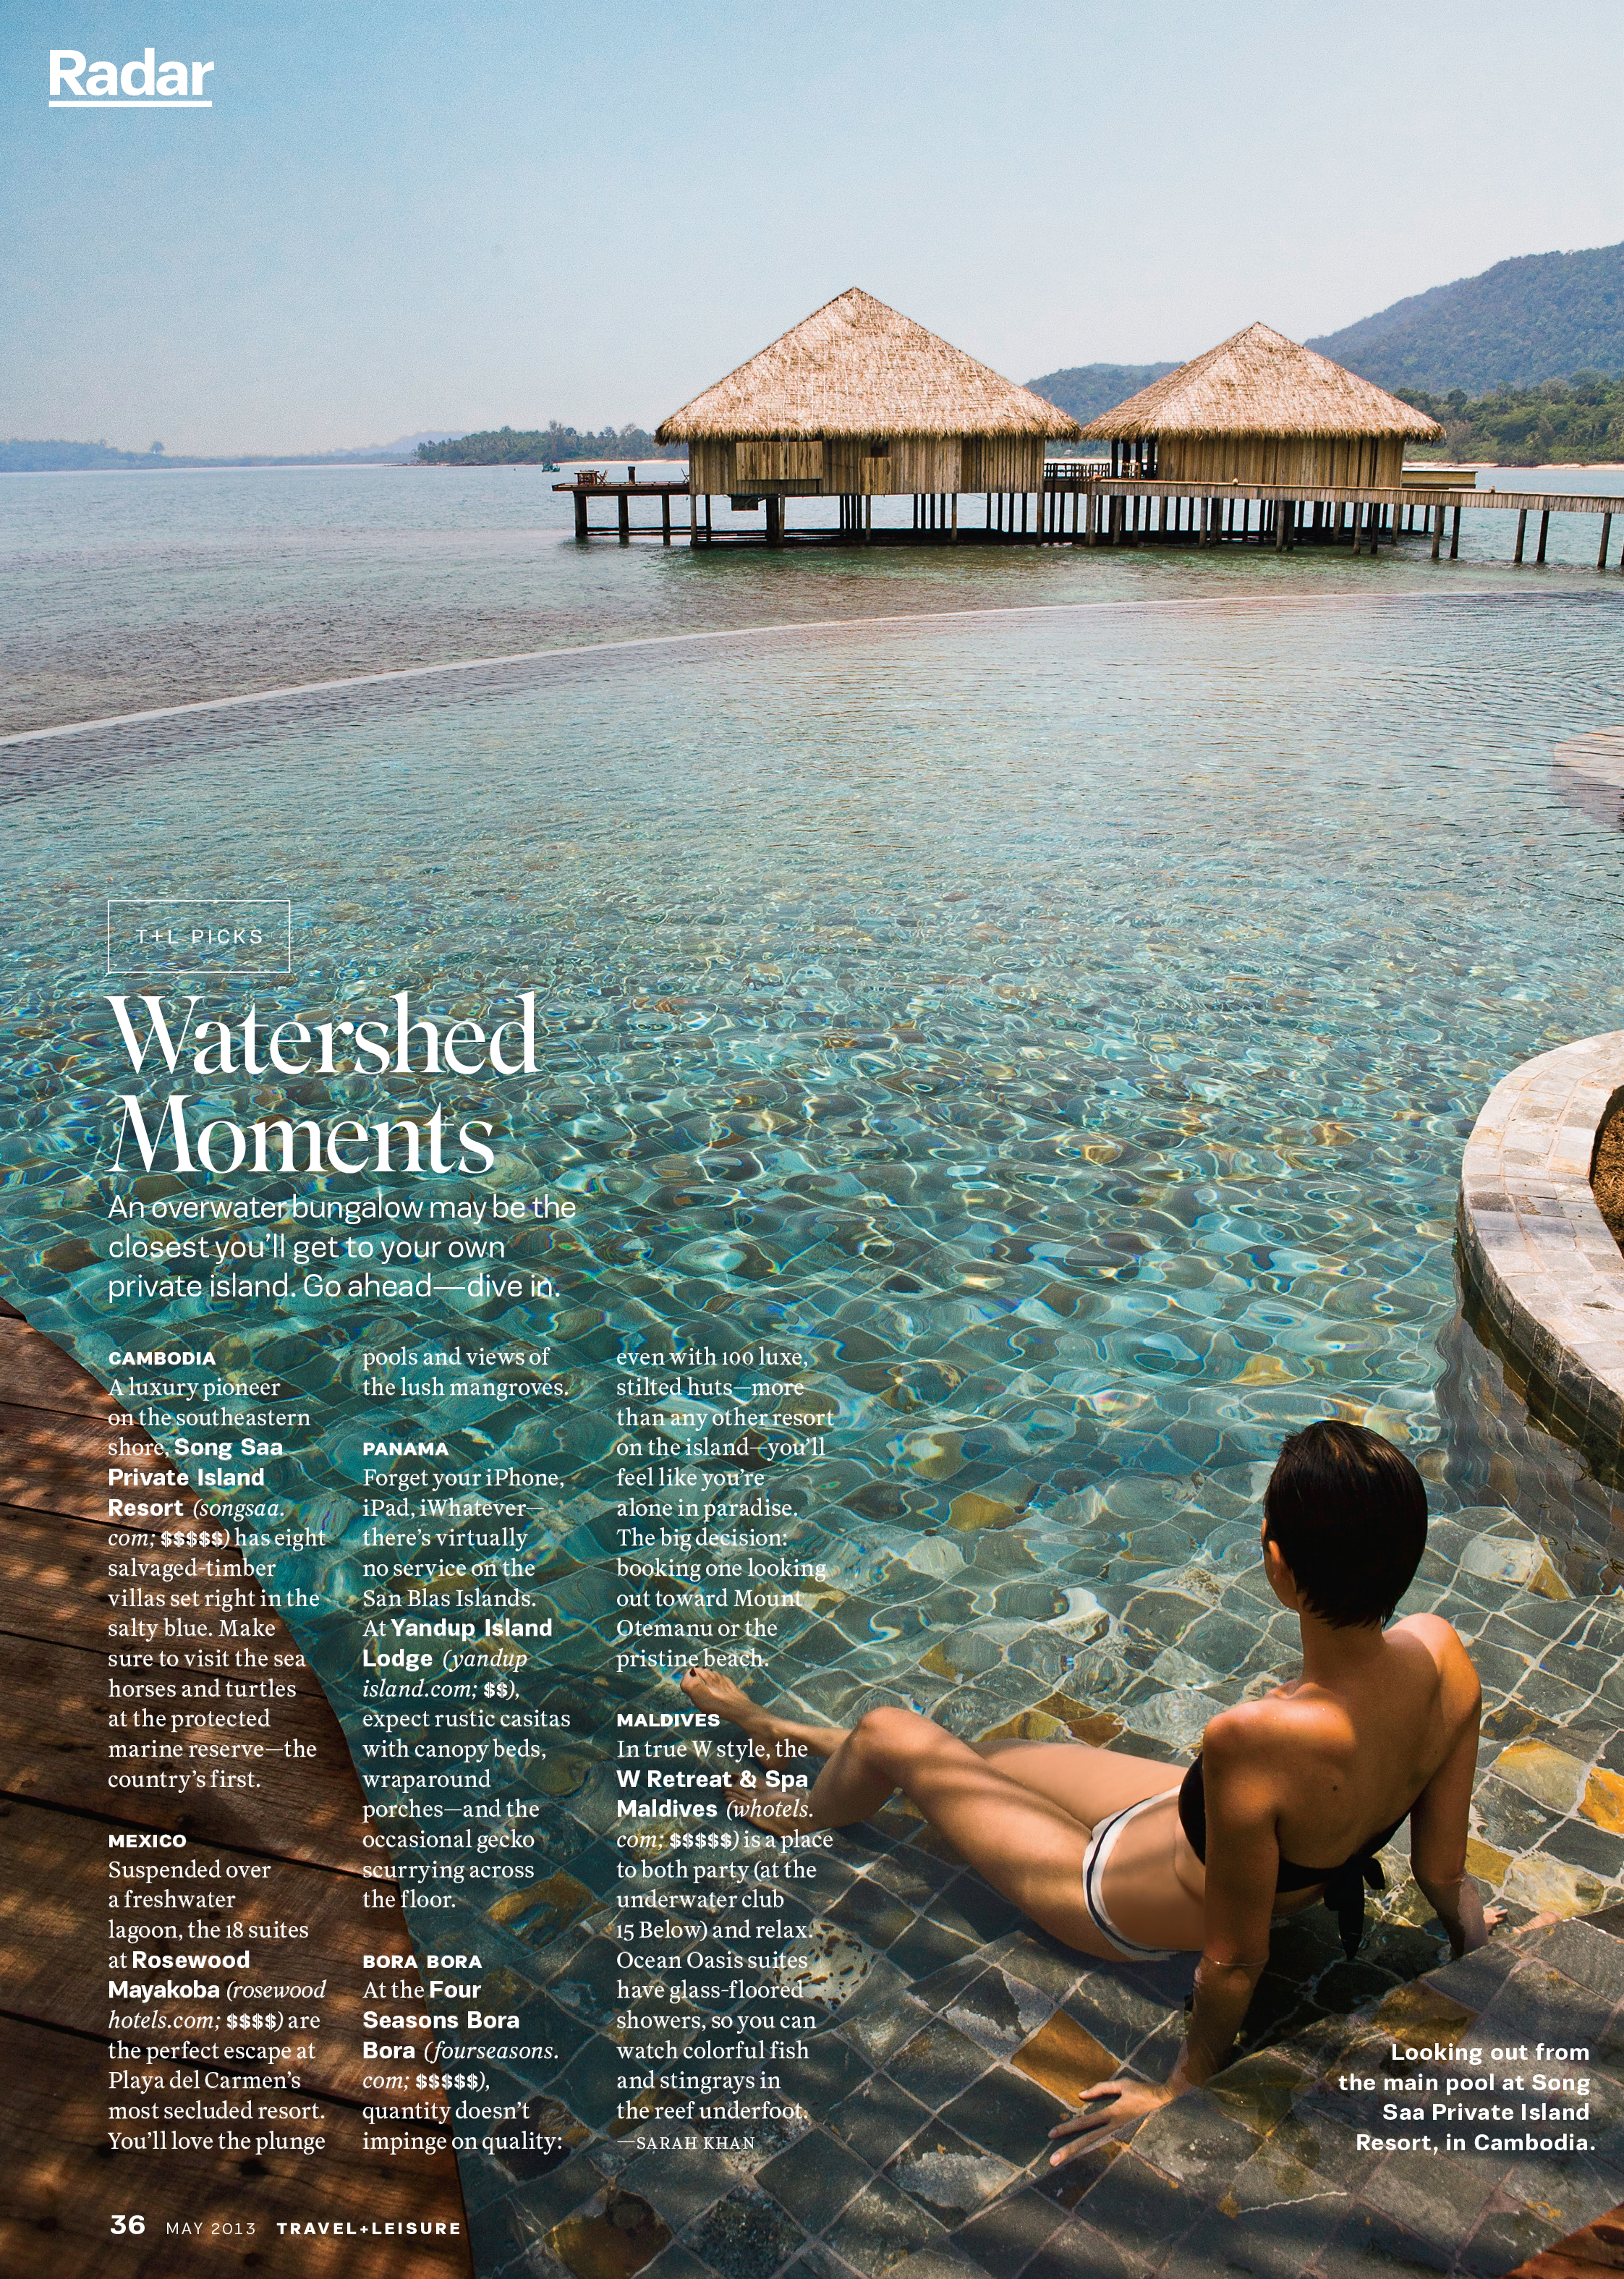 Travel + Leisure: Watershed Moments